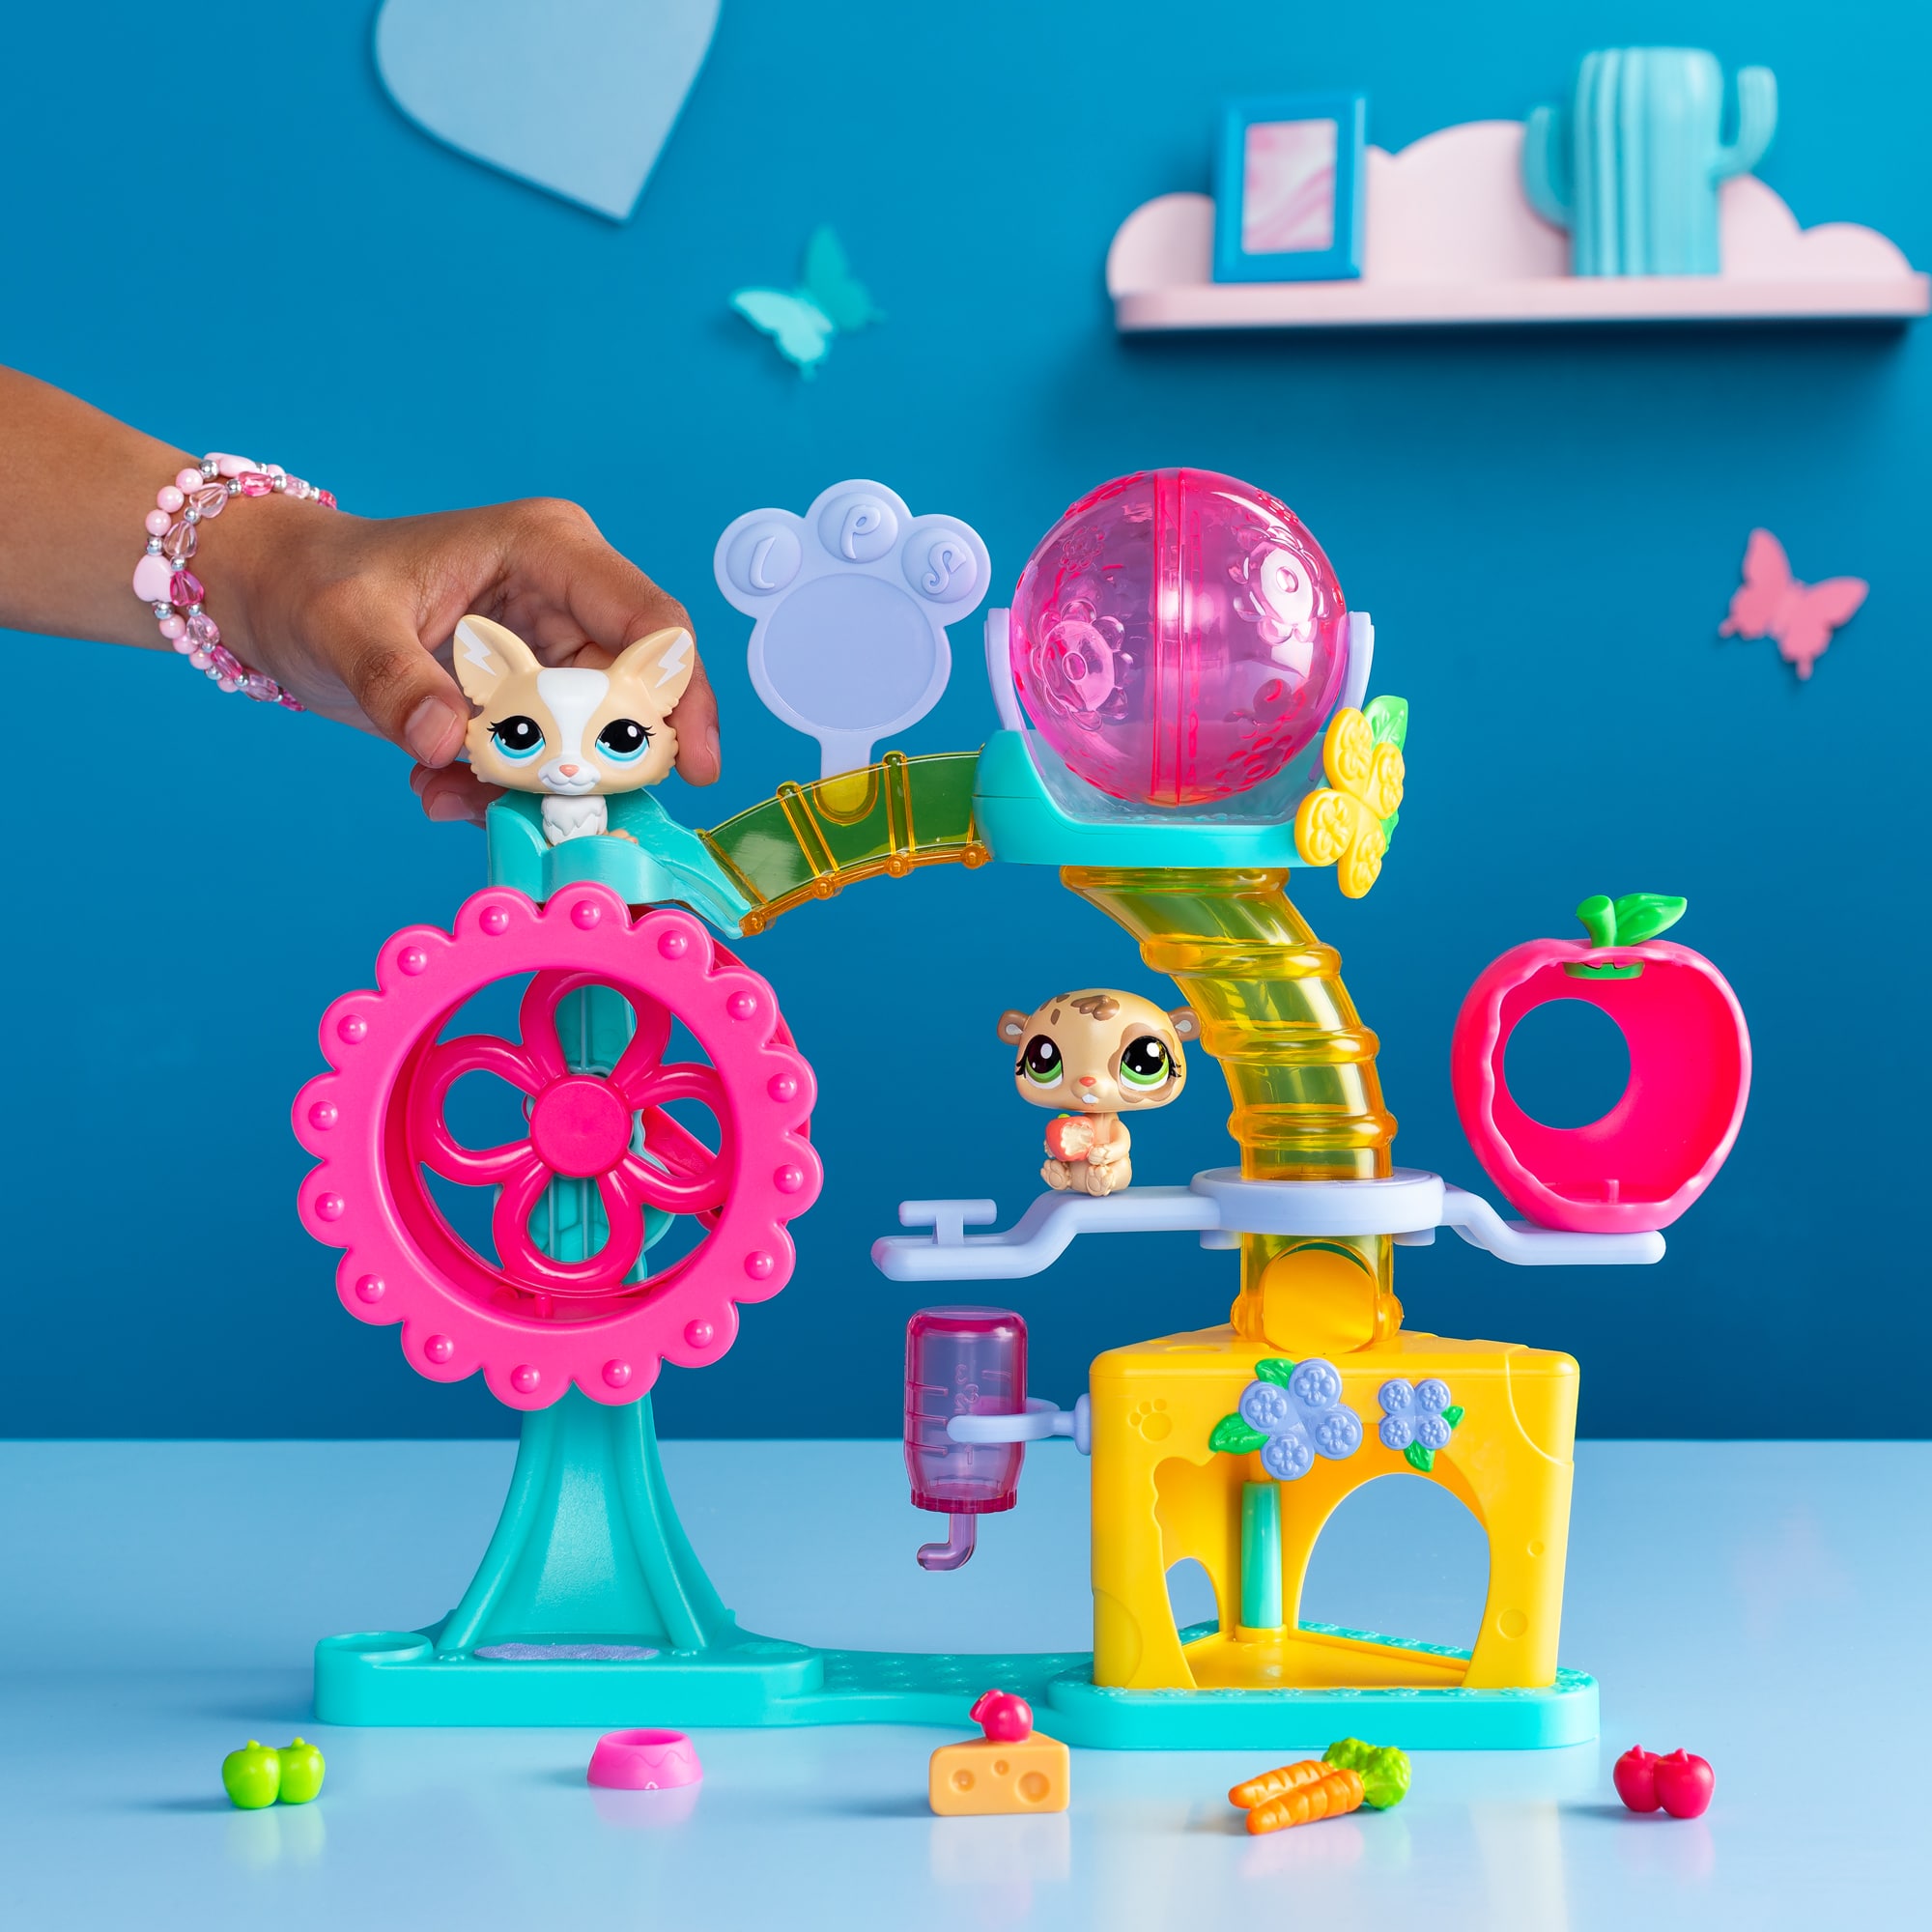 Littlest Pet Shop toys are back - new gen 7 toys from BasicFun 2024 